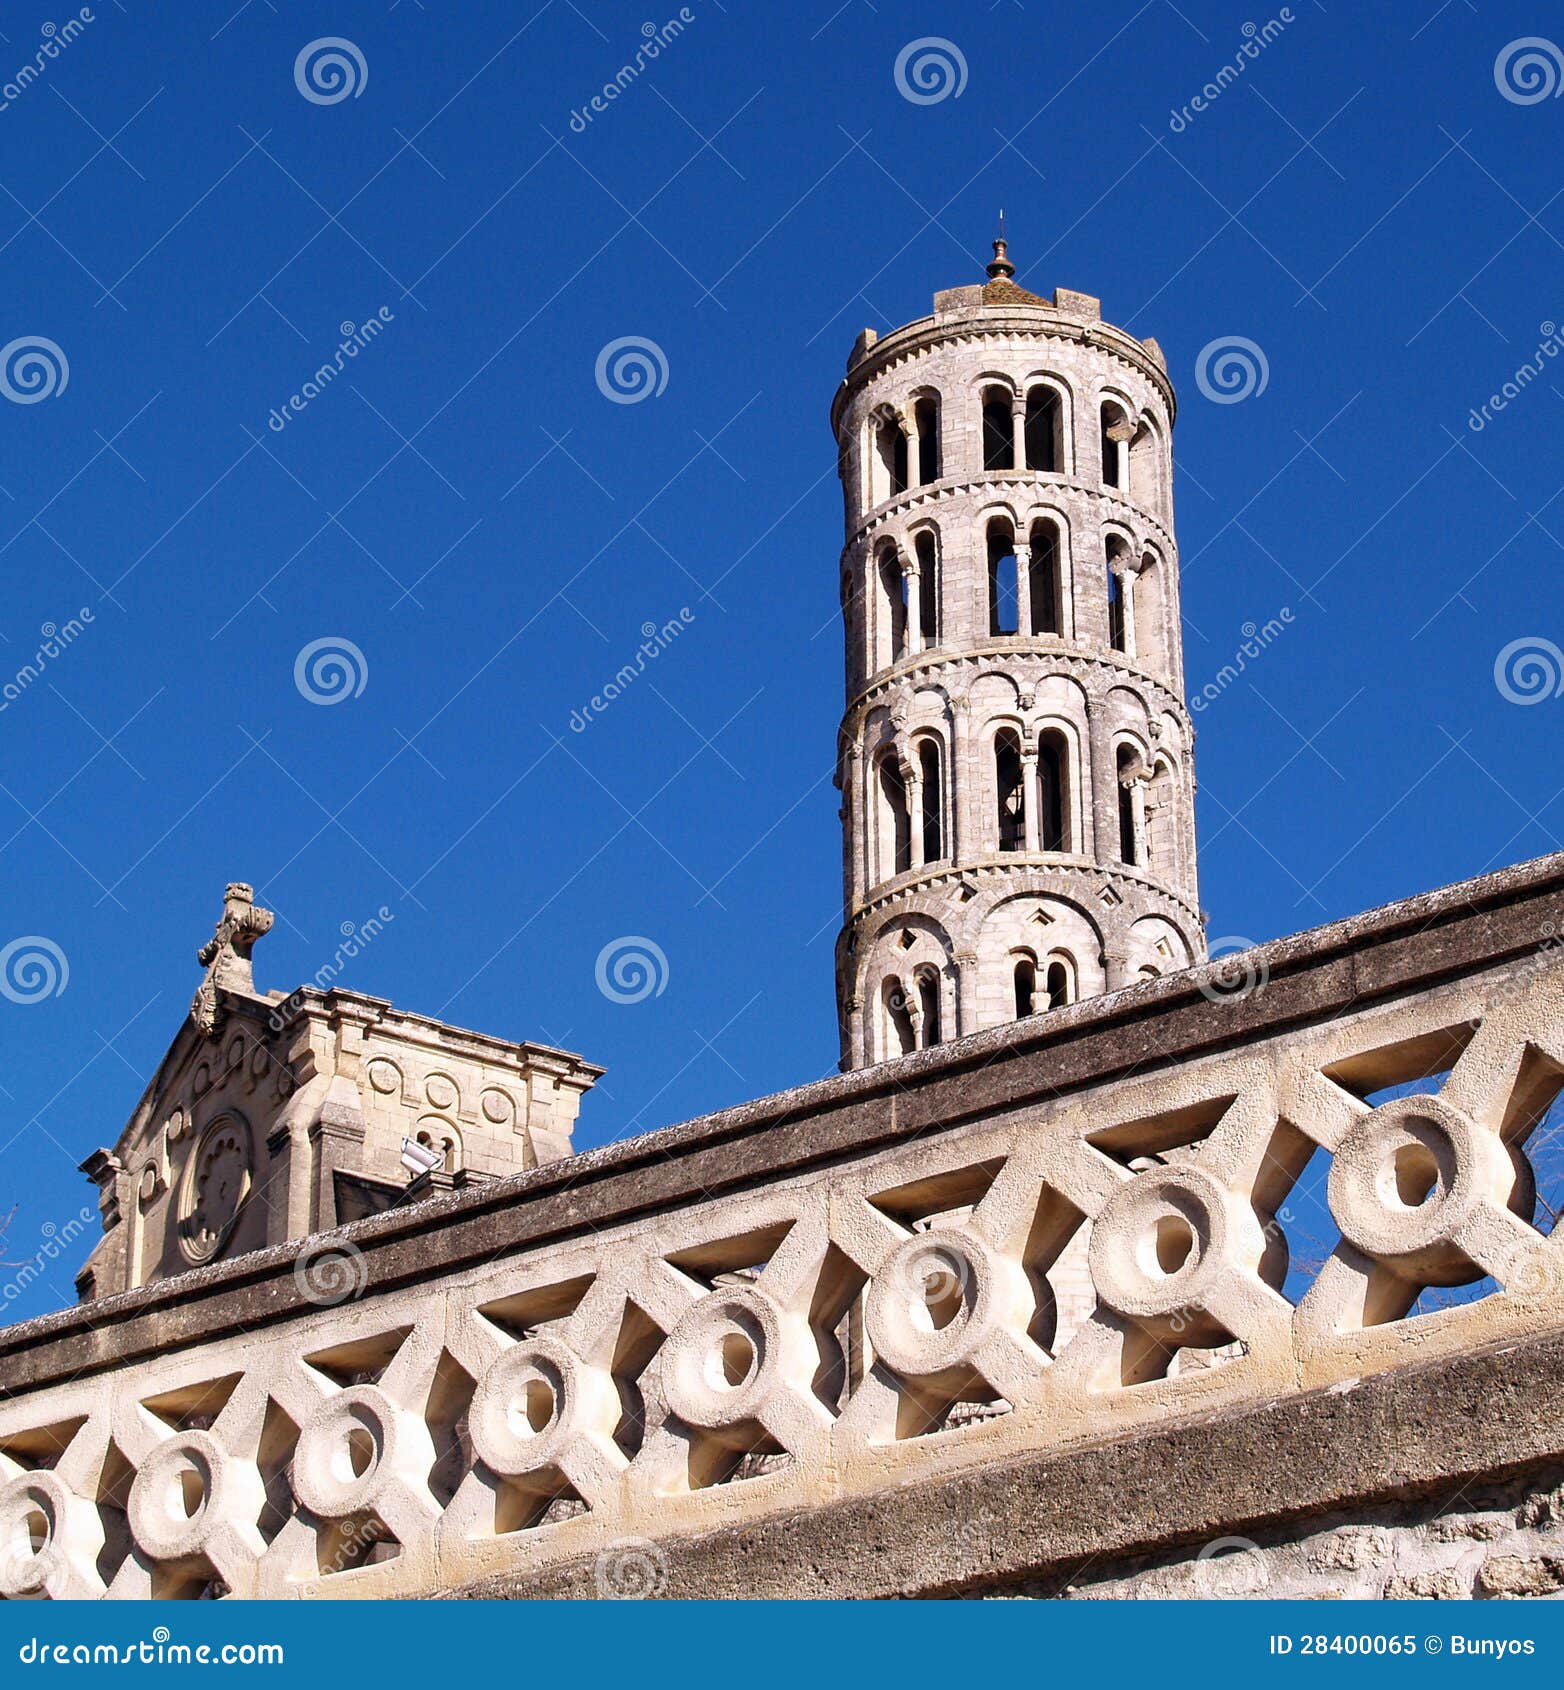 fenestrelle tower, saint-theodorit cathedral in uzes